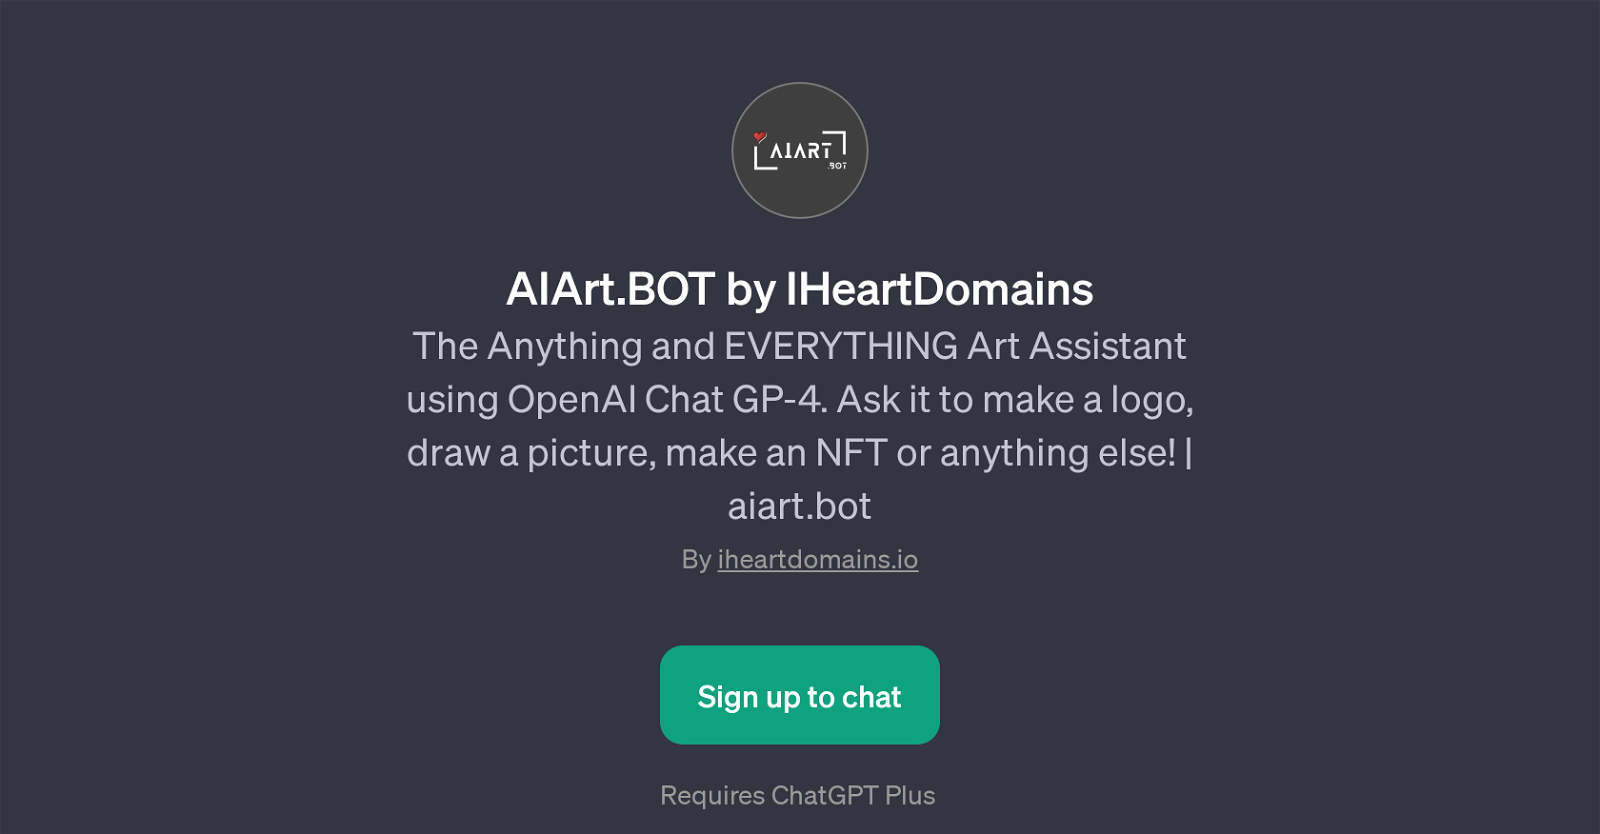 AIArt.BOT by IHeartDomains website